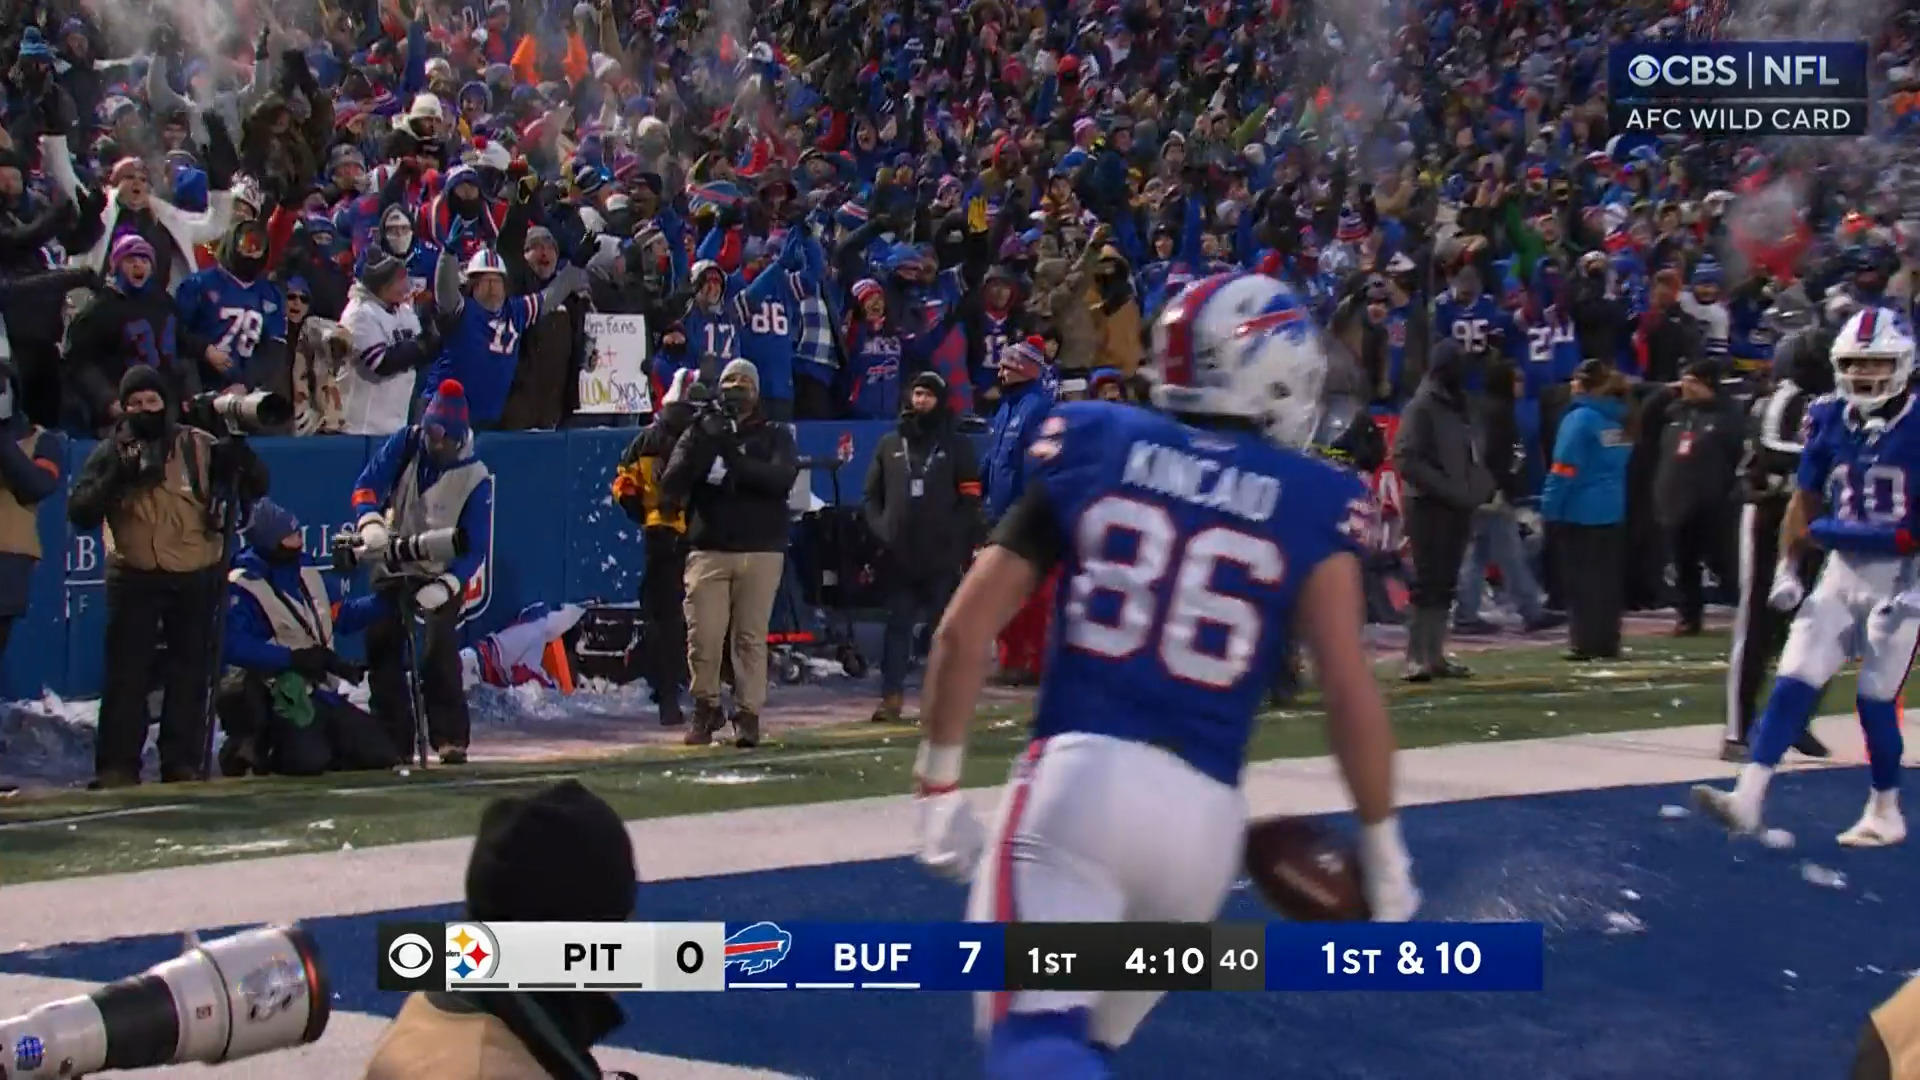 Second touchdown, second snowball party Good mood in Buffalo